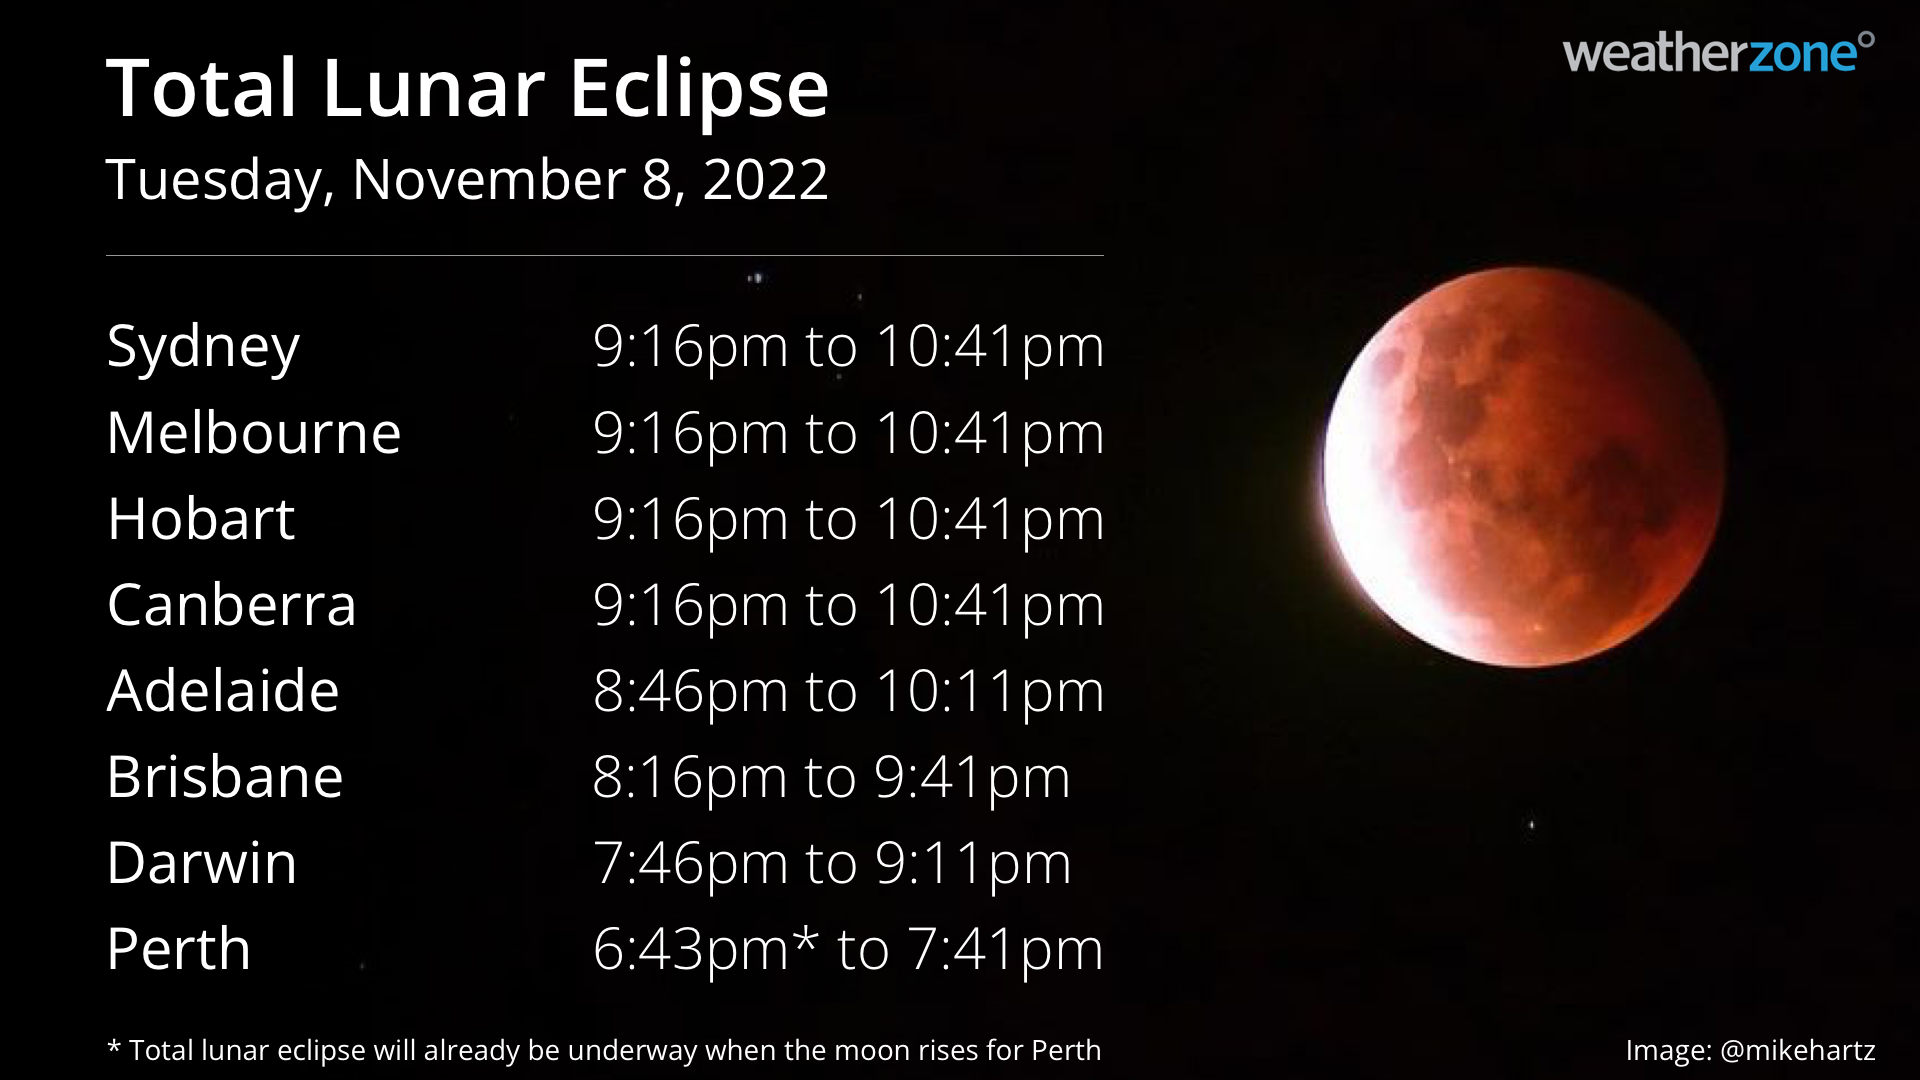 Don't miss this week's lunar eclipse